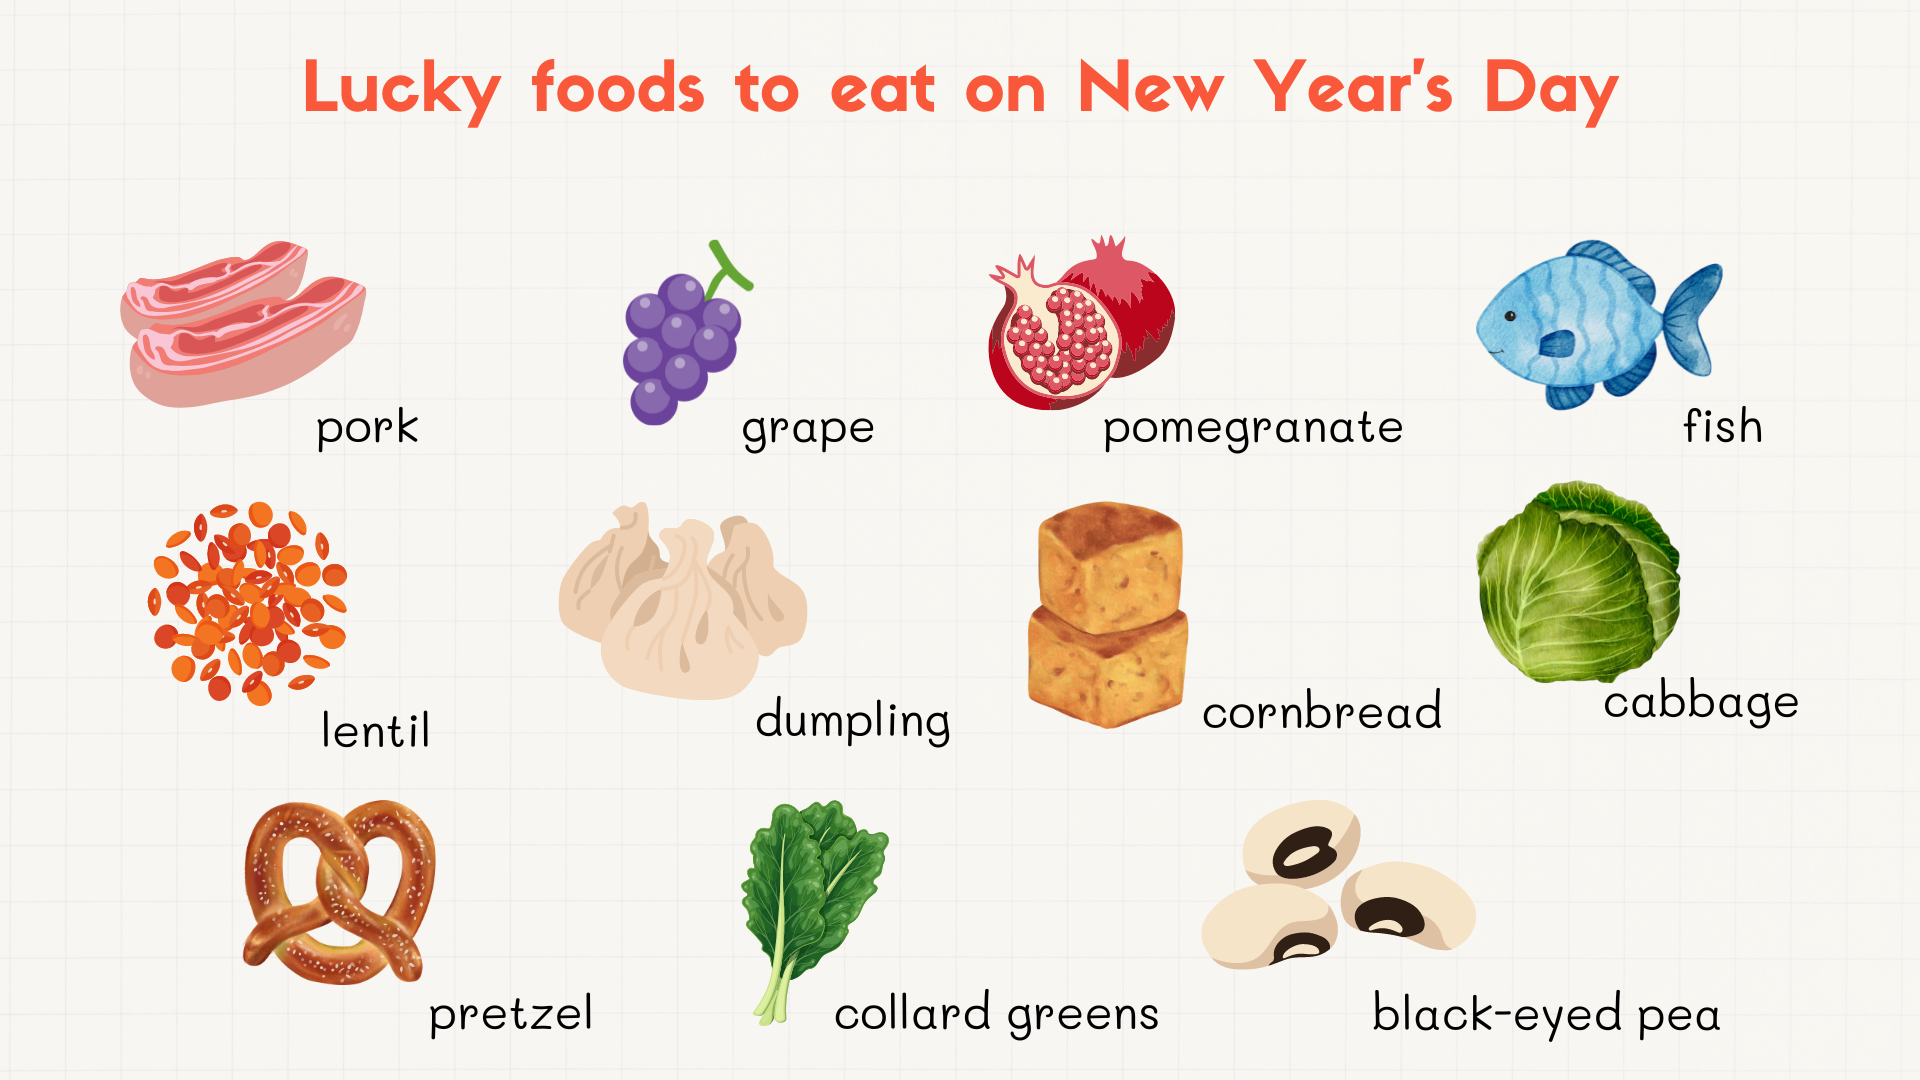 Lucky foods to eat on New Year's Day